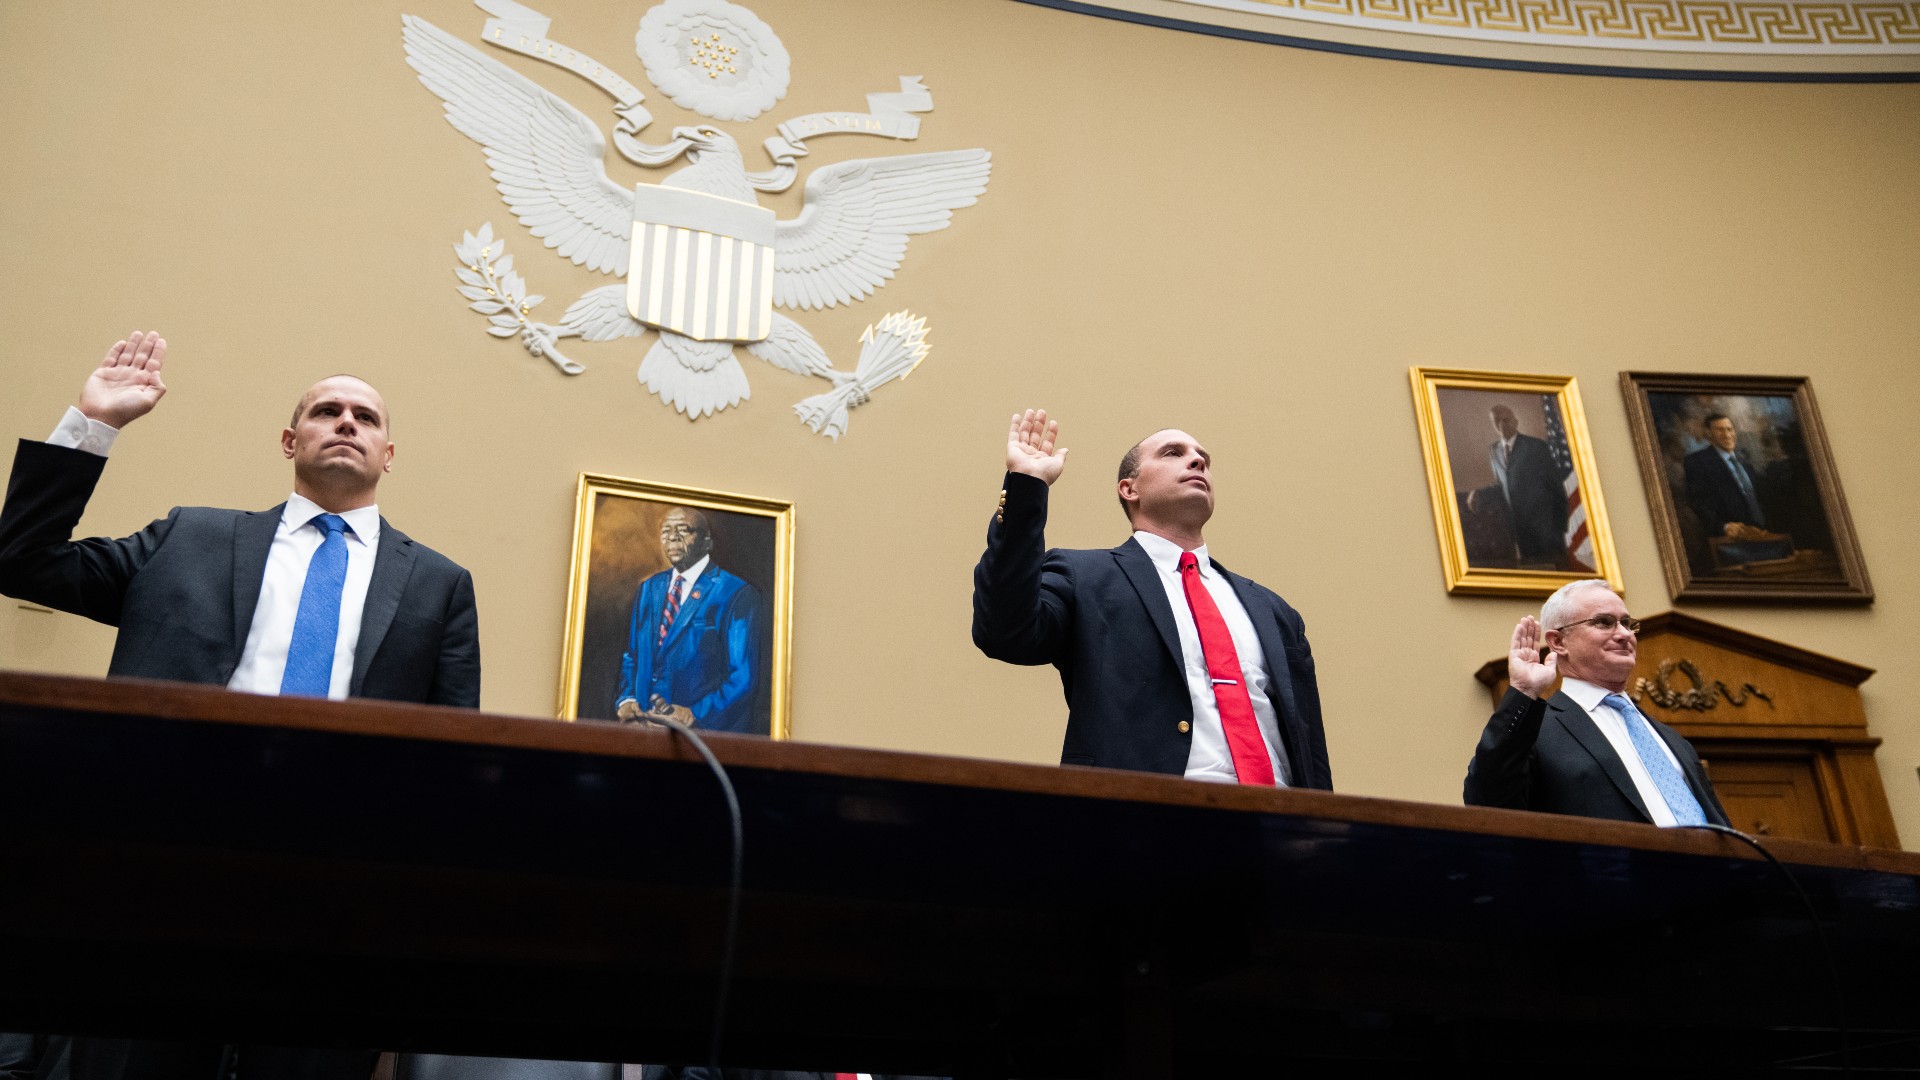 three men in suits raise their right hands under a seal of the us government